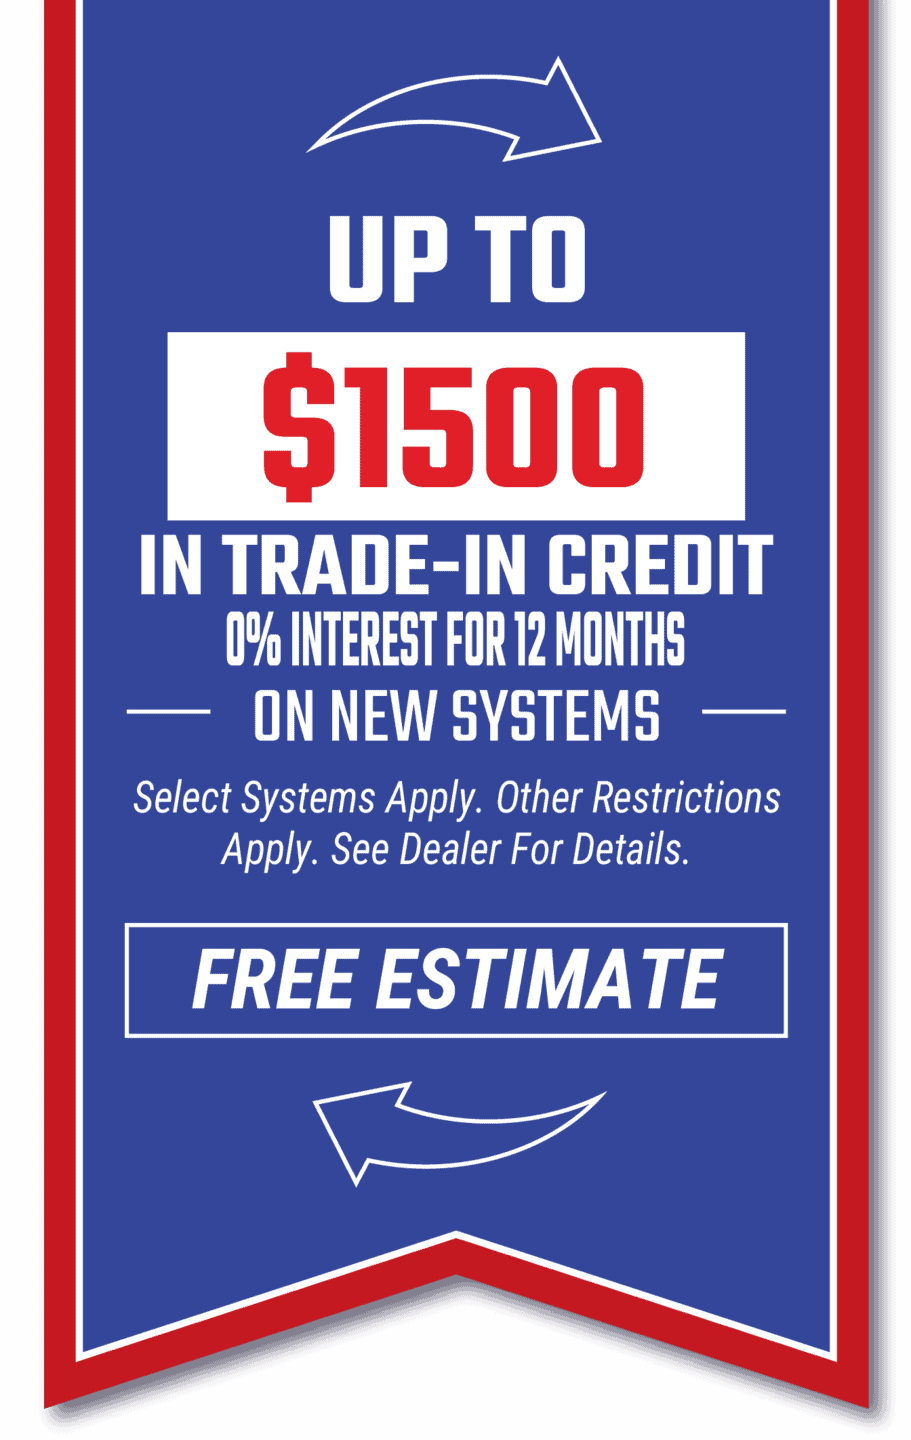 $1500 Trade-In credit on new systems. 0% interest for 12 months.